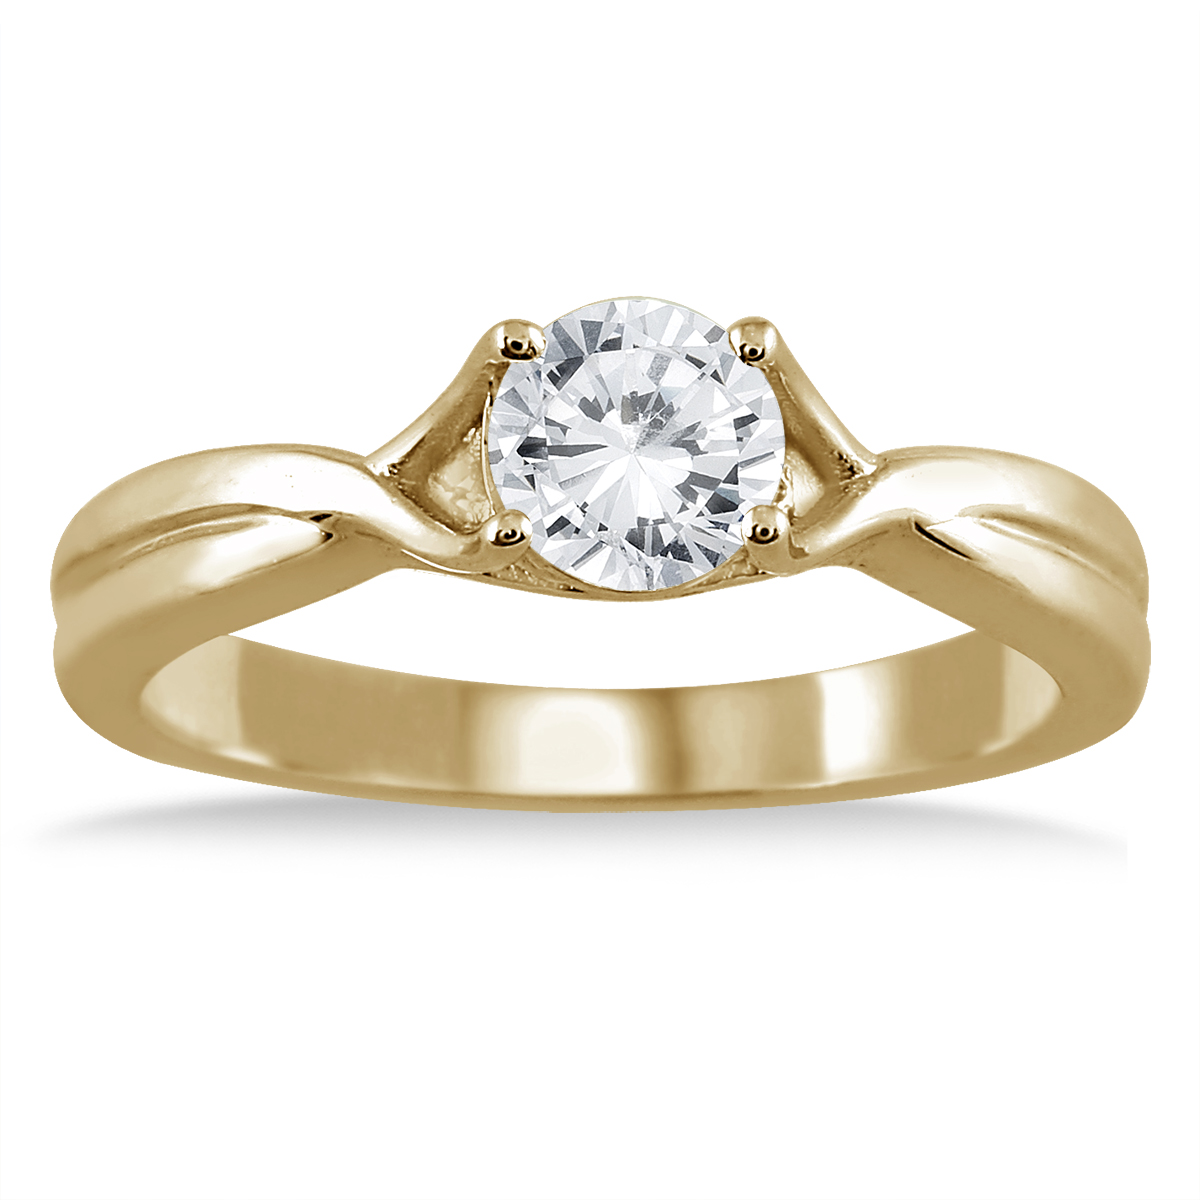 1/2 Carat Diamond Solitaire Ring in 14K Yellow Gold